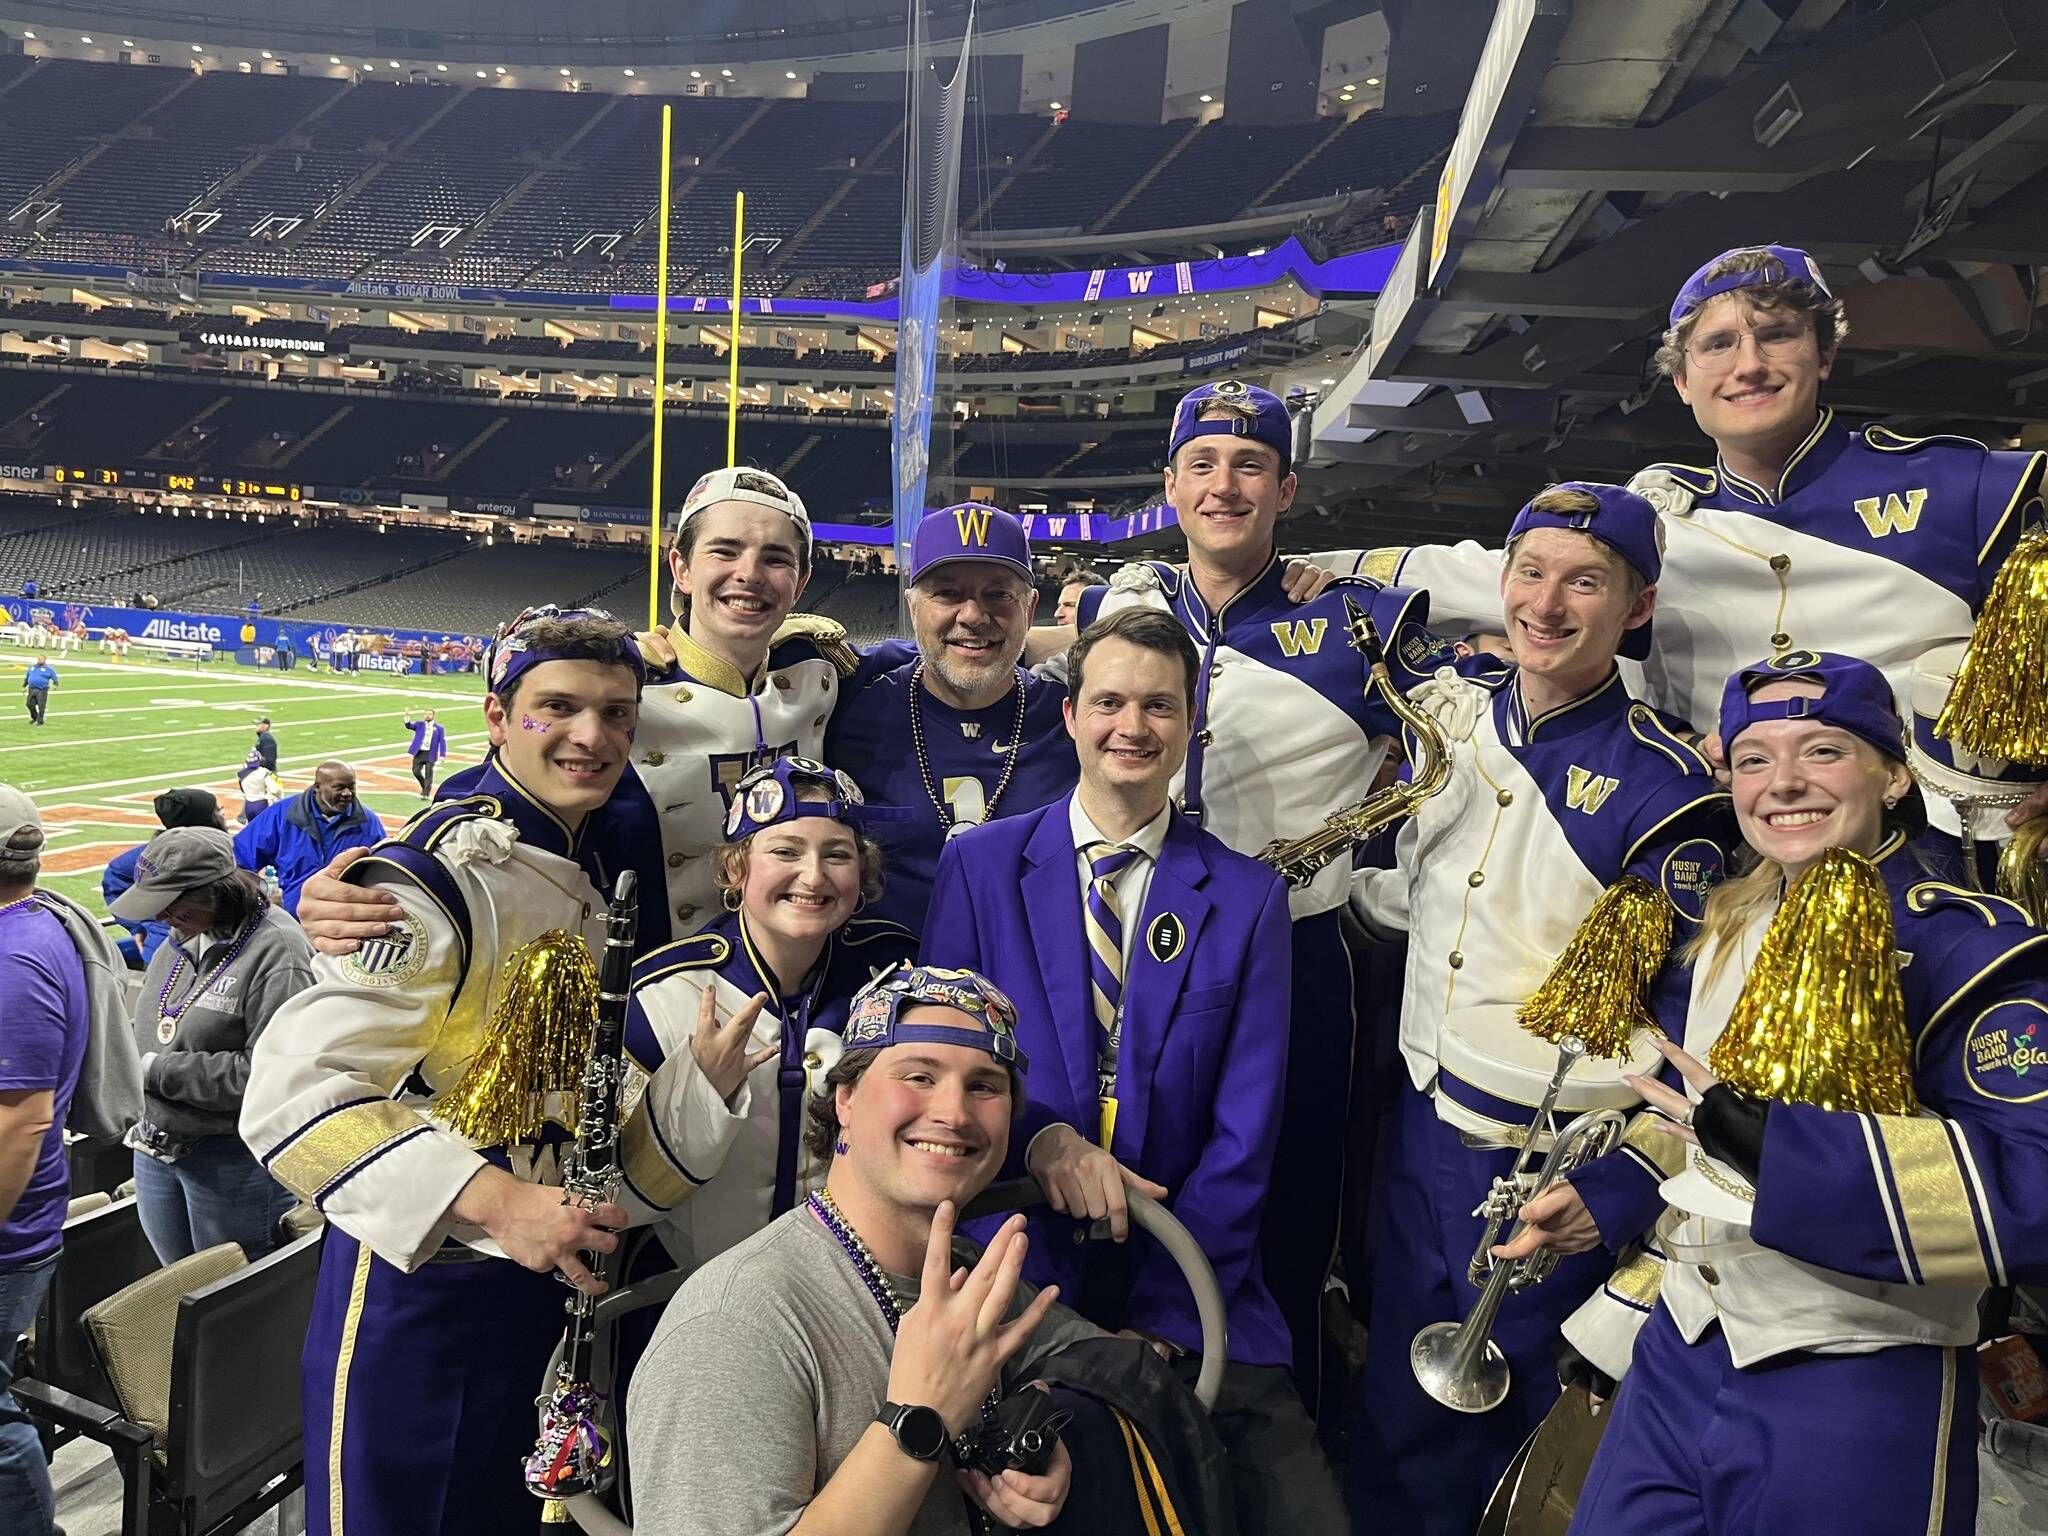 Islander Middle School band director and Mercer Island School District fine arts coordinator David Bentley (donning a W hat) connected with Mercer Island High School band alumni that are part of the University of Washington band at the Sugar Bowl football game in New Orleans on Jan. 1. No. 2-ranked UW (14-0) beat Texas, 37-31, and will battle top-ranked Michigan (14-0) for the national championship on Jan. 8 in Houston. Also pictured are: Lauren Majewski, alto saxophone; Dylan Majewski, band alum; Aaron Levin, tenor saxophone; Jake Levin, trumpet; Camilla Gaugush, drumline; David Stewart, assistant director; Marcus Valentin, mellophone; Bridger Bourke, drum major; and Thomas Mangold, clarinet. Photo courtesy of the Mercer Island School District